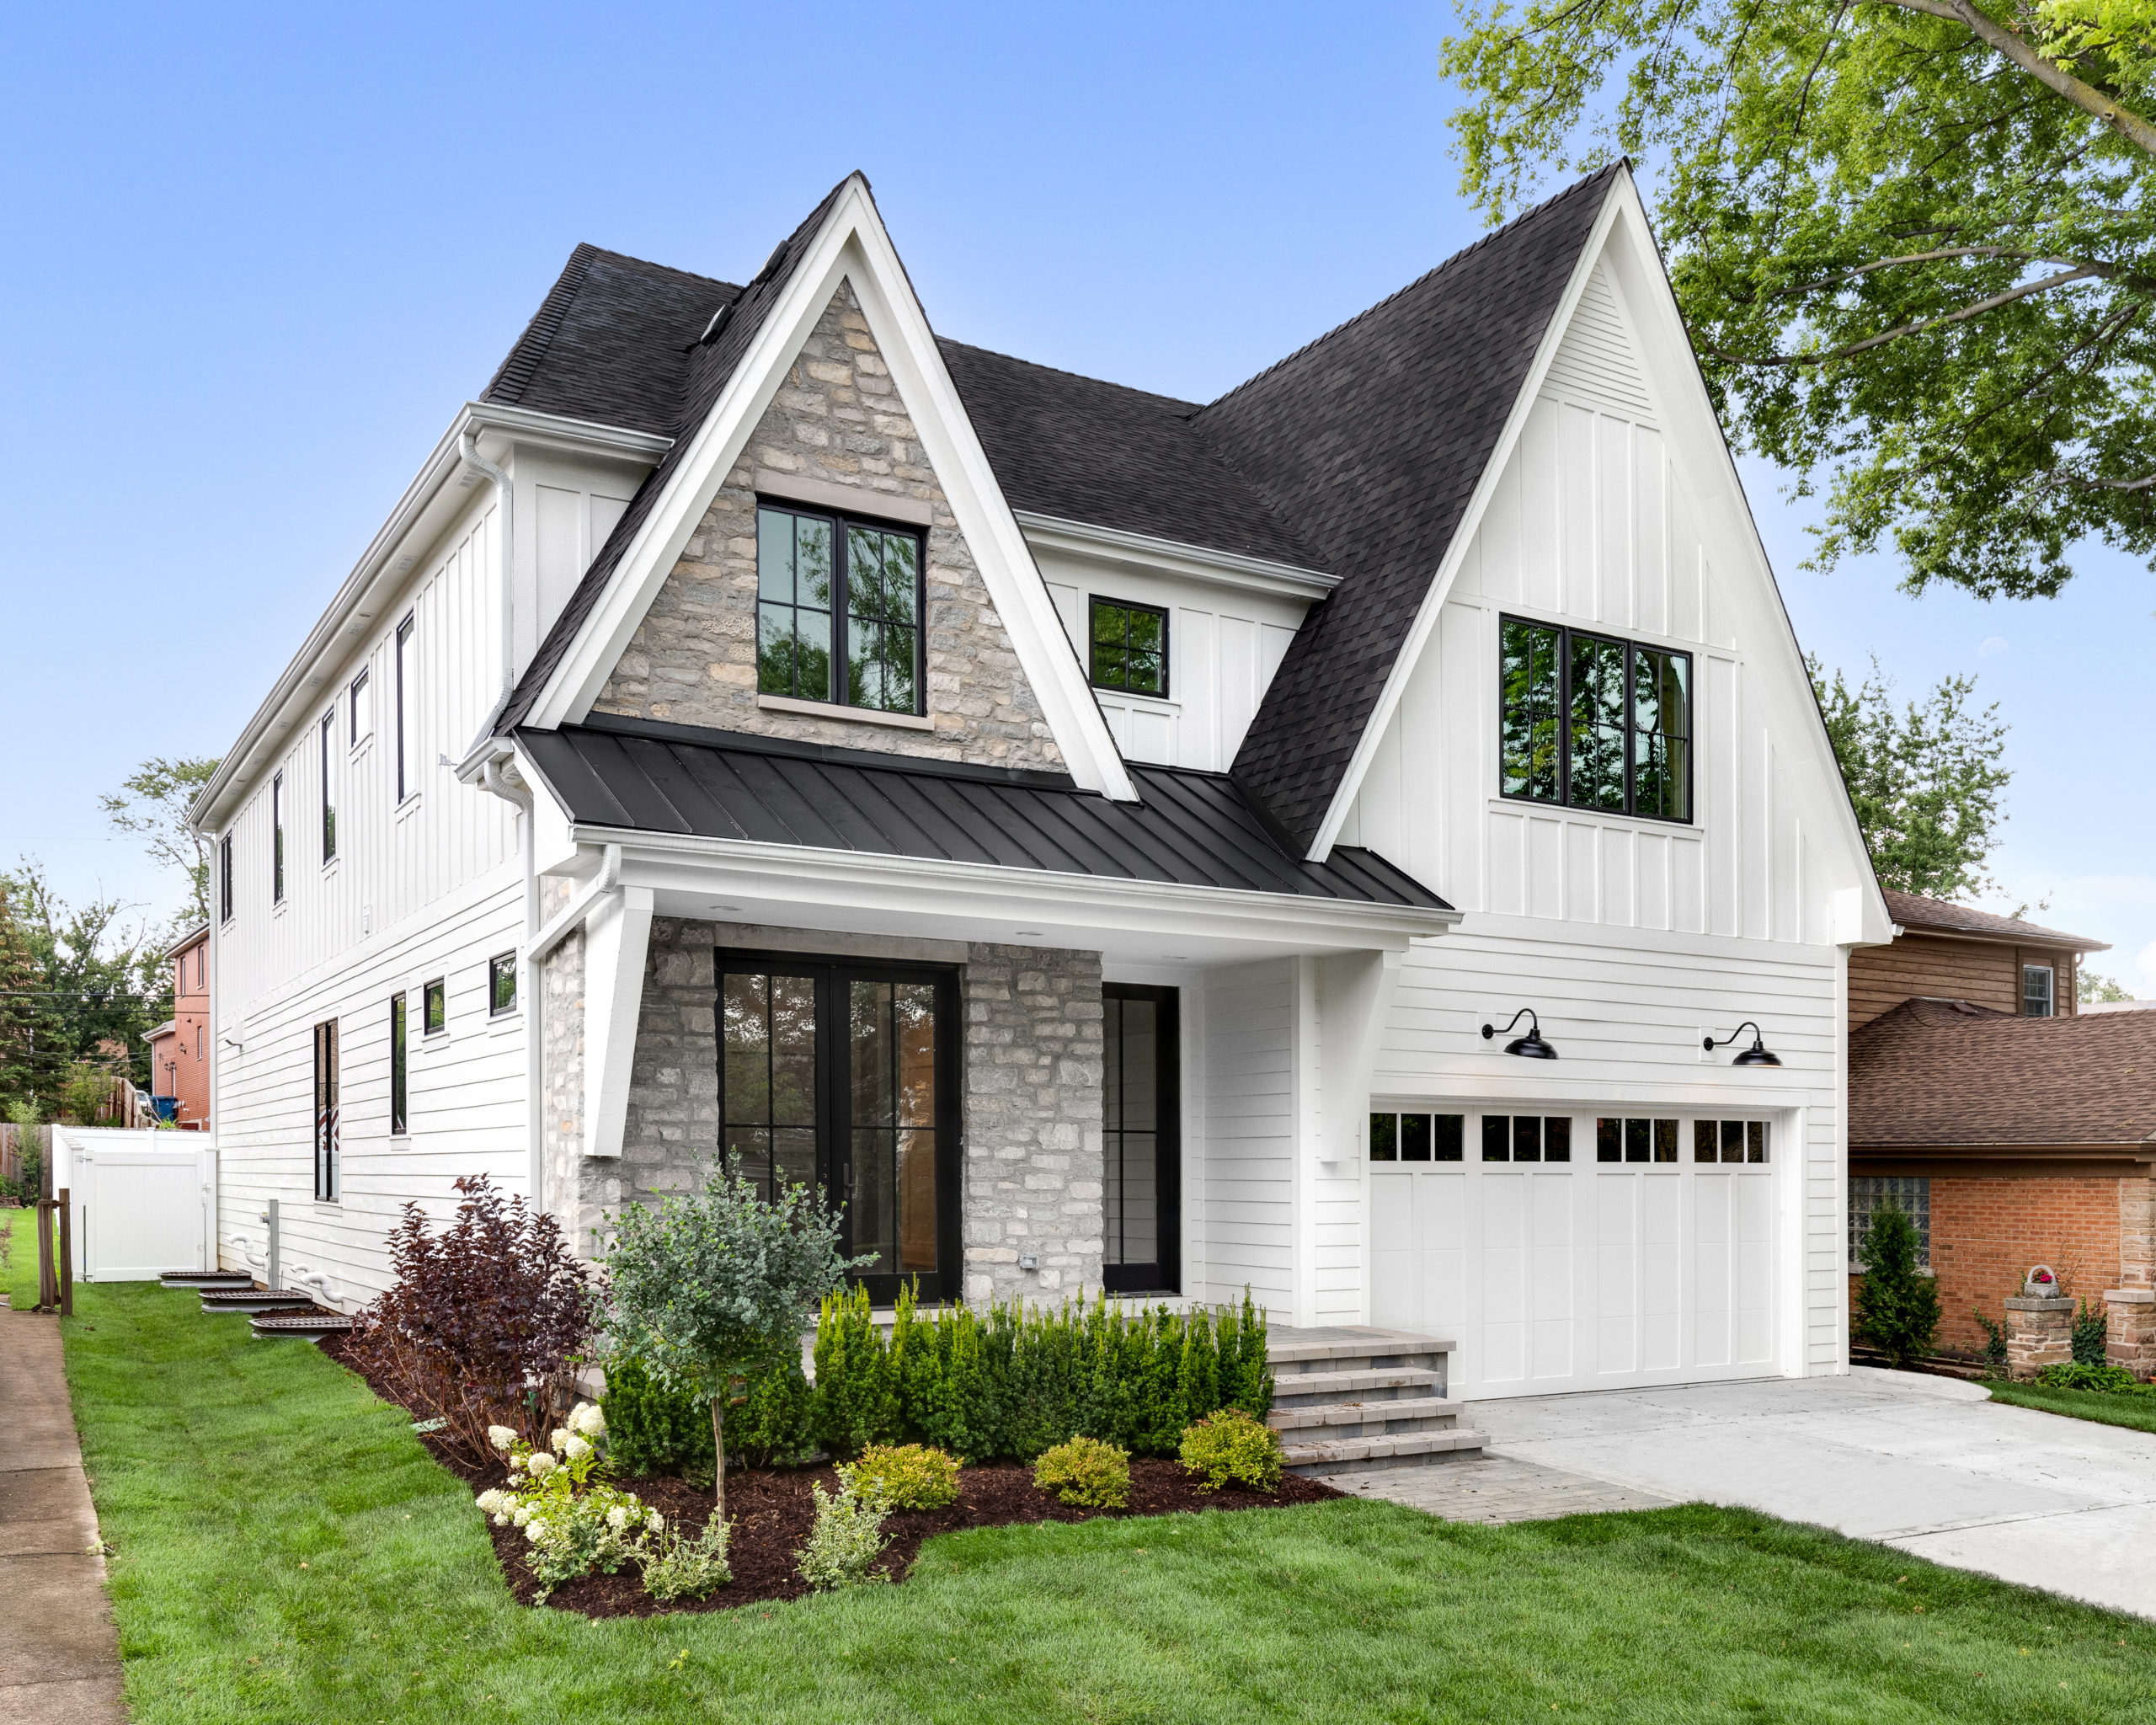 White Houses with Black Trim: Trend or Is it Here to Stay?